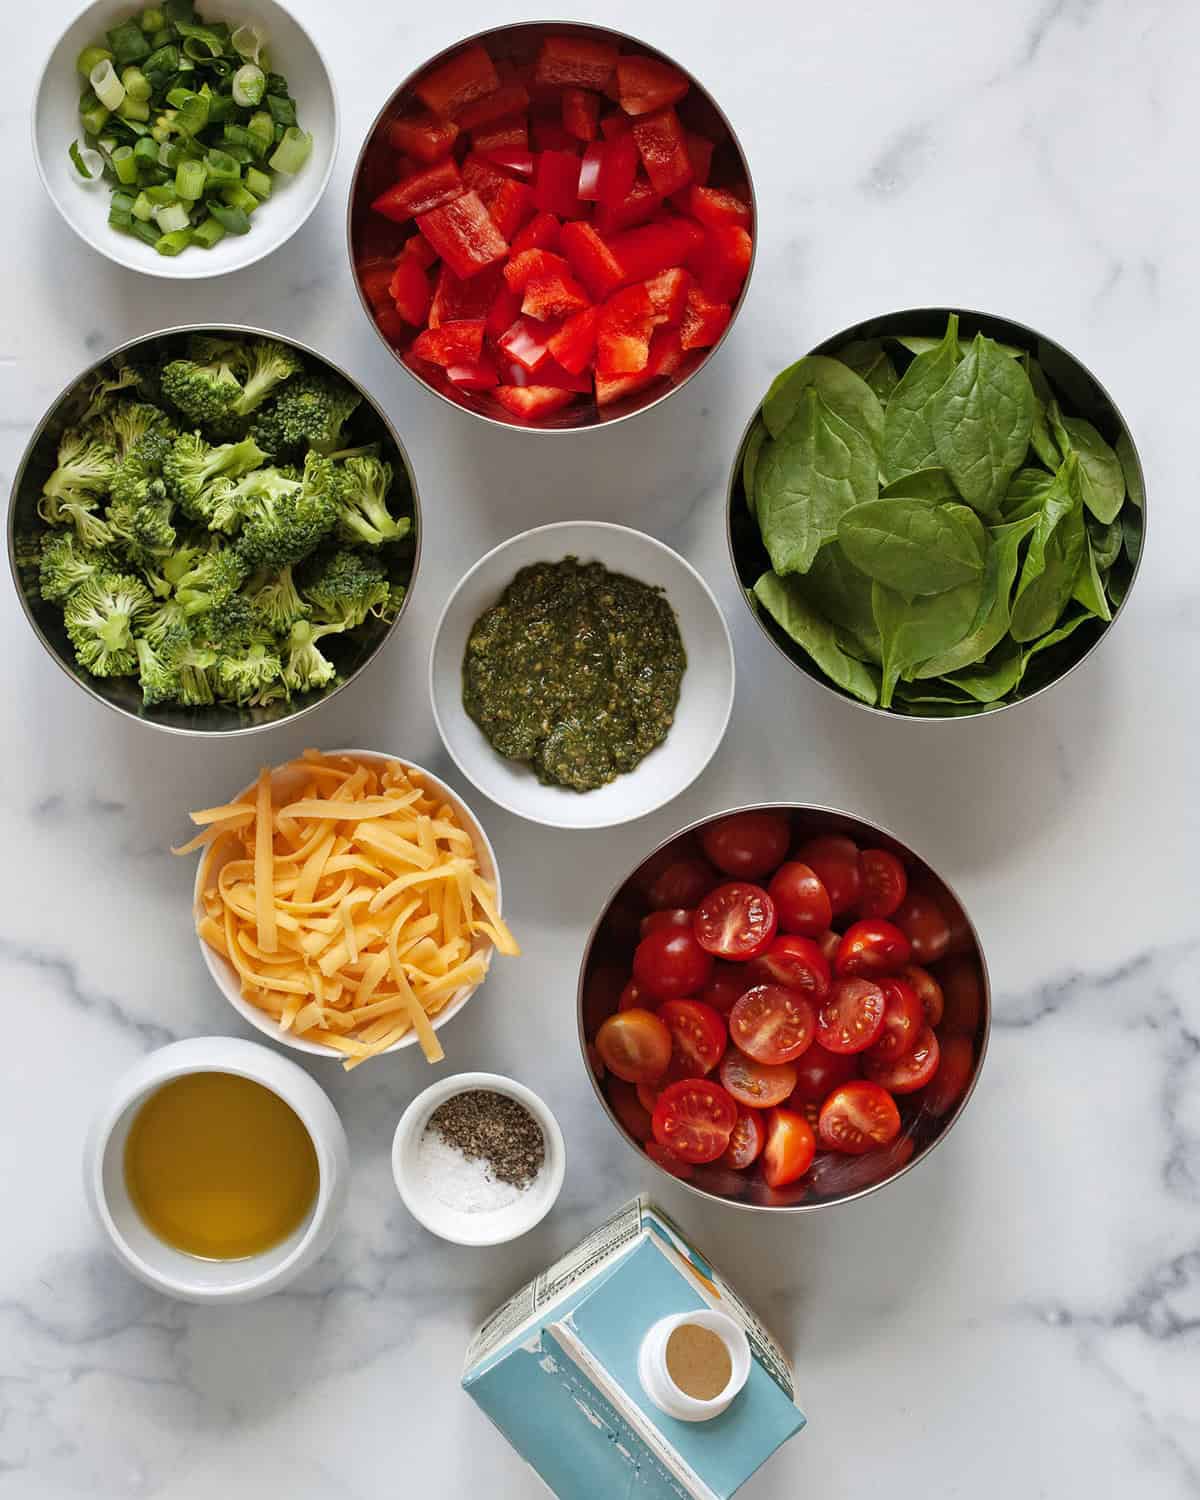 Ingredients including egg whites, tomatoes, red peppers, broccoli, cheddar, spinach, pesto, oil, scallions, salt and pepper.